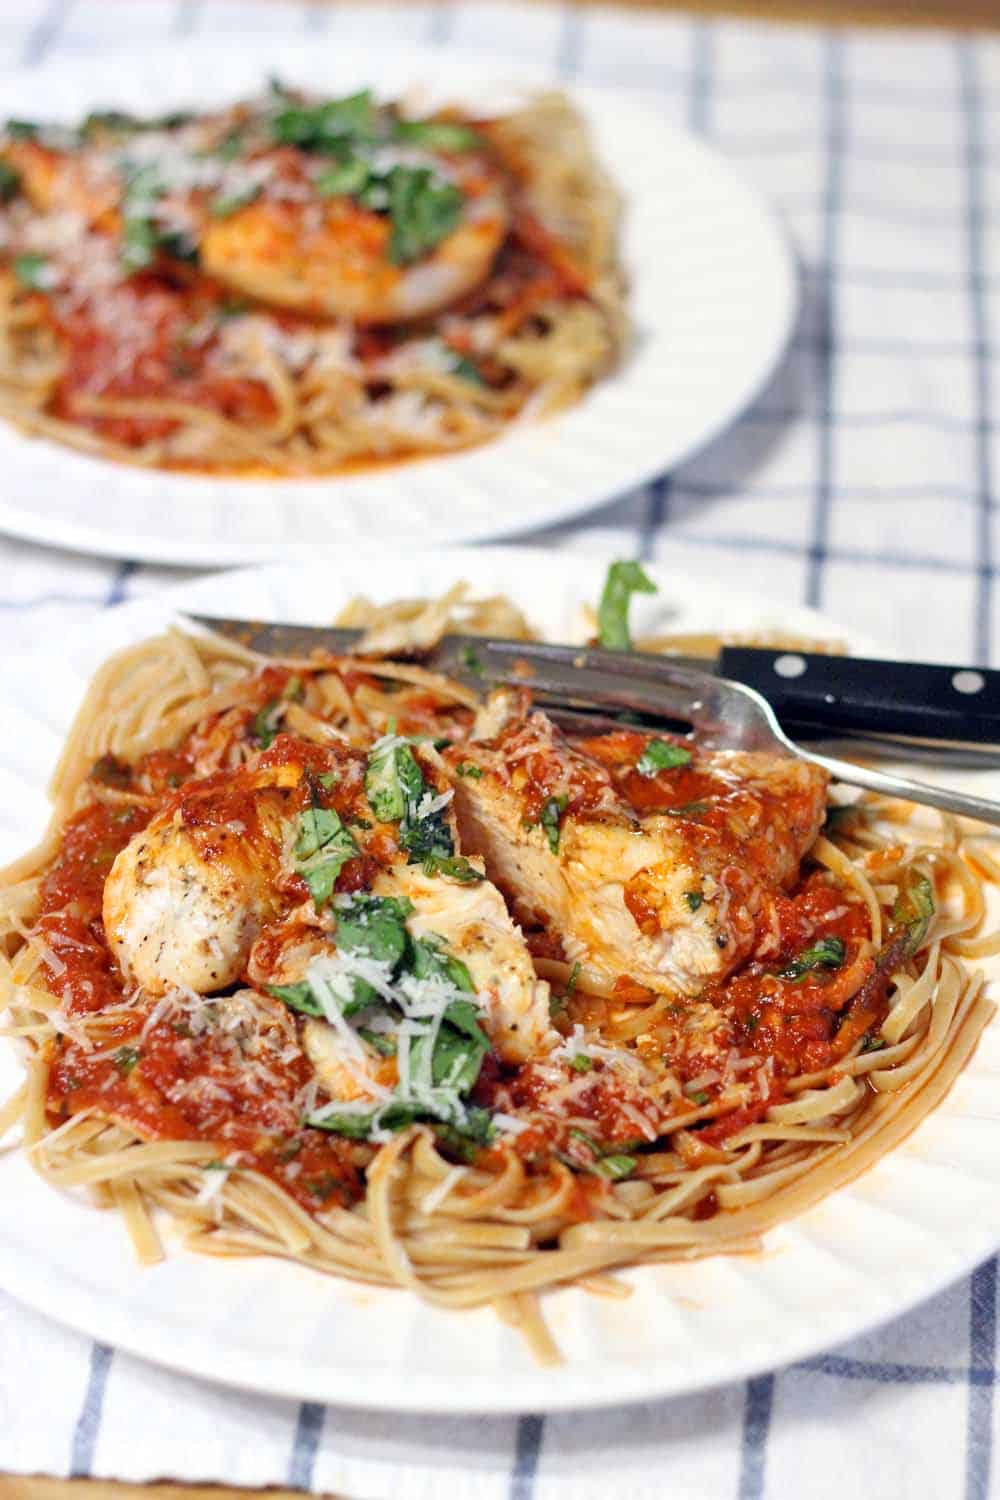 Chicken and Linguine with Tomato Basil Butter Sauce | Perfectly seared chicken with easy, buttery marinara sauce served atop a bed of whole wheat linguine- tastes like Italy, but is so quick and easy to make on a weeknight!